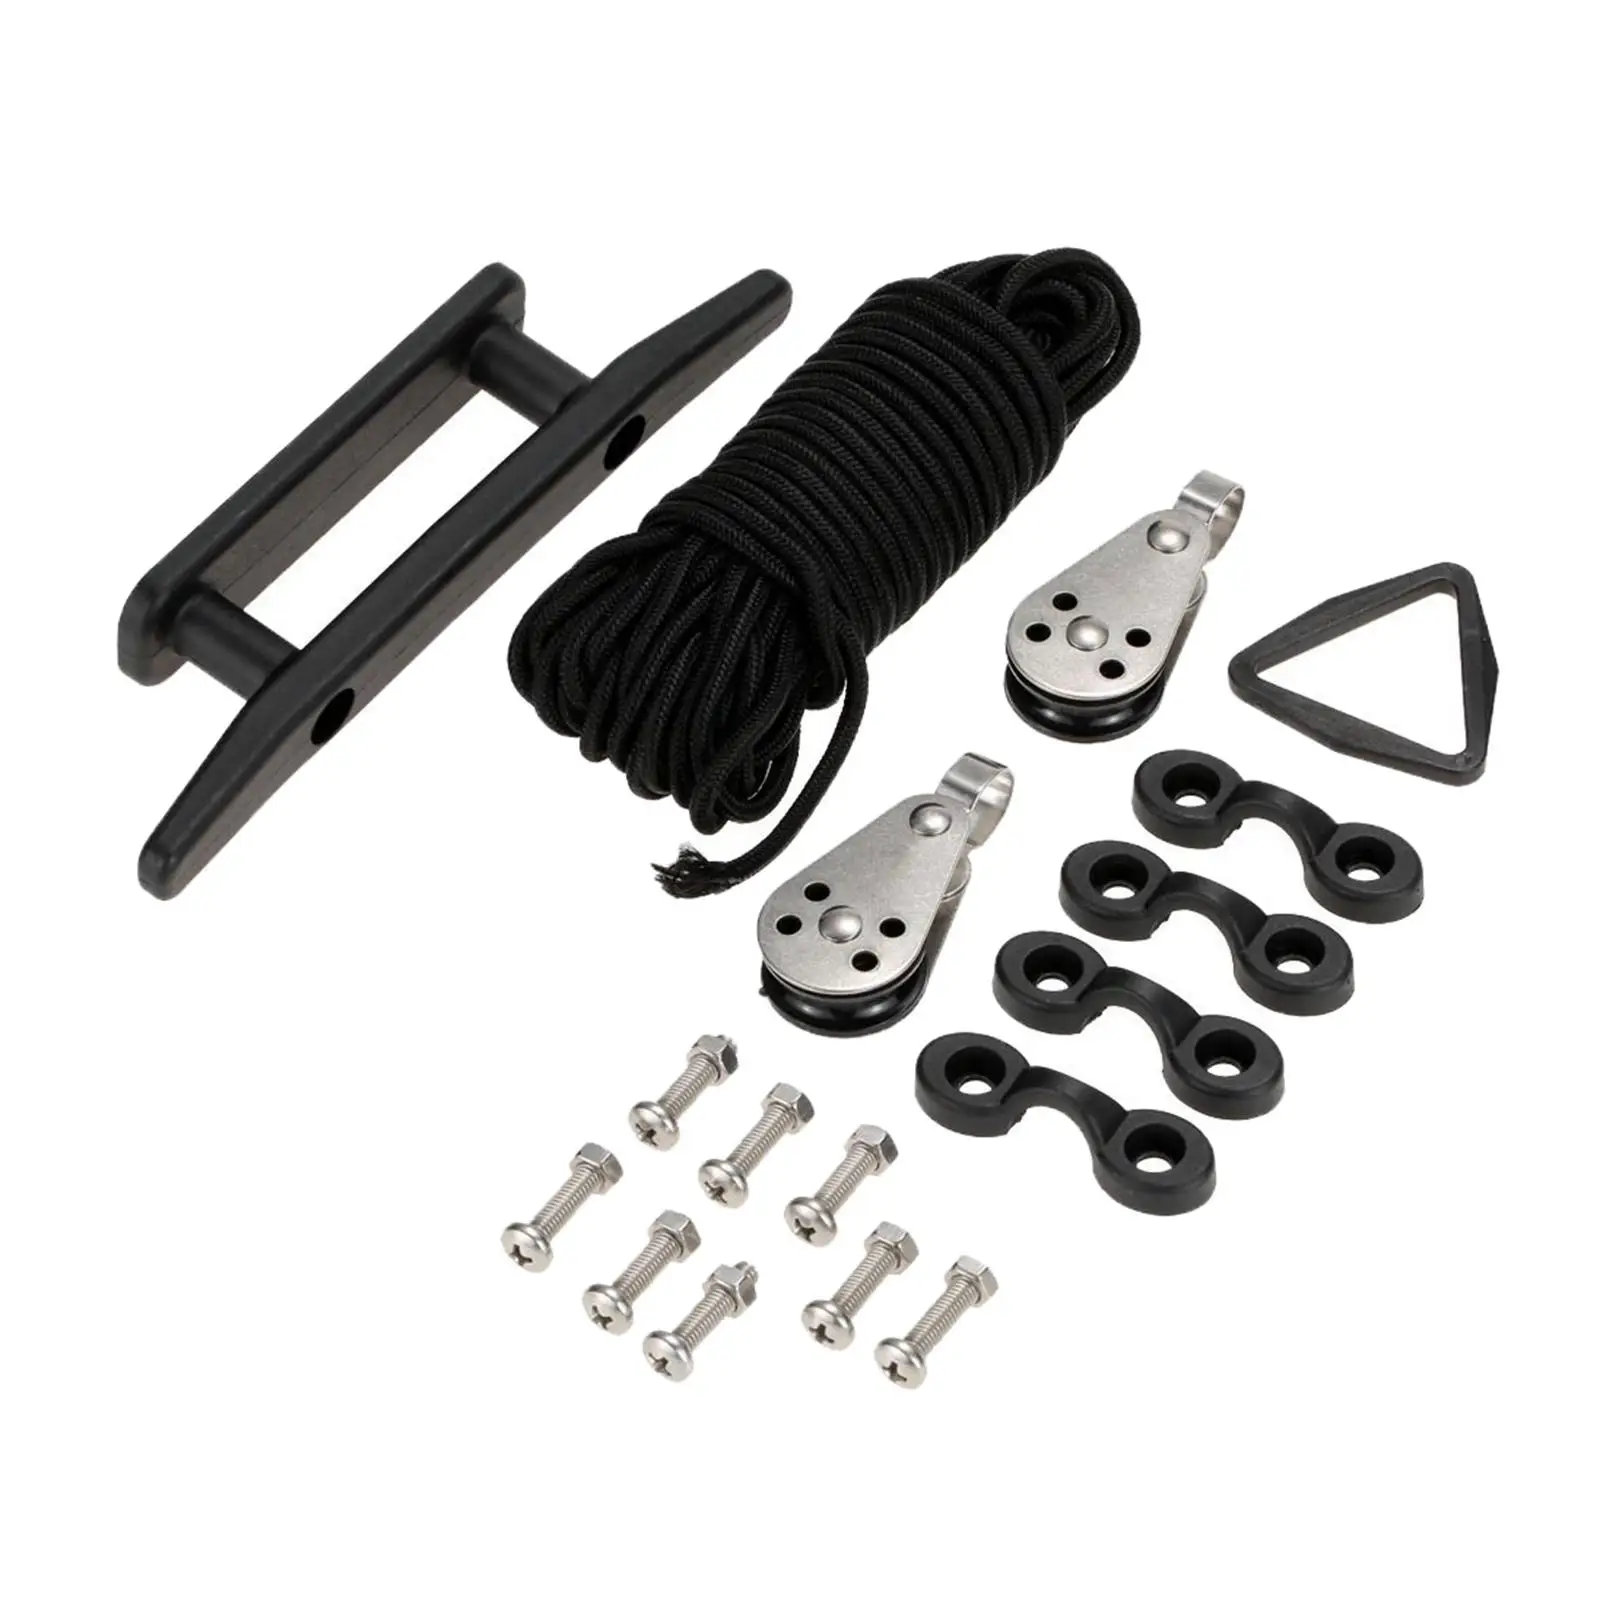 Kayak Canoe Boat Anchor Trolley Kit with Rope, Pulleys, Stainless Steel 316 Hardware Cleats, Pad Eyes, Rings